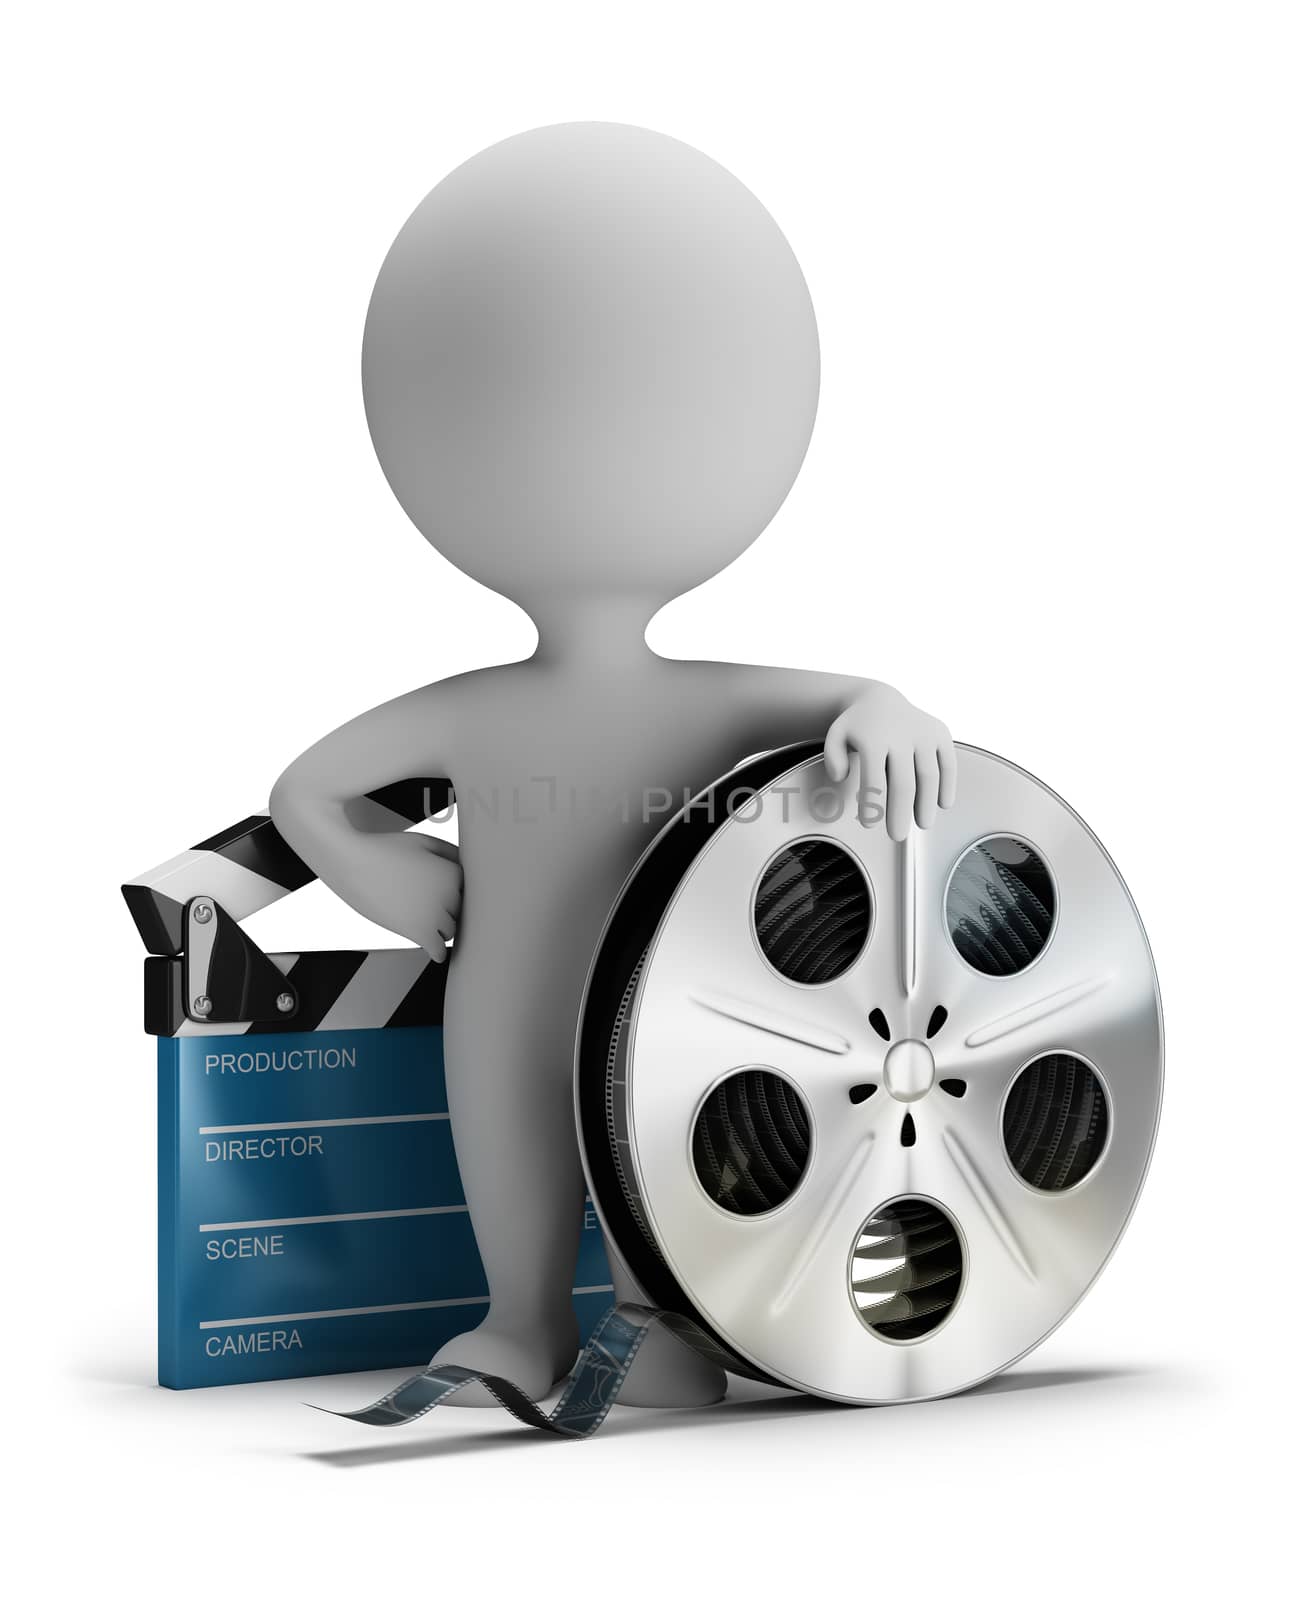 3d small person standing next to cinema clapper and film tape 3d image. White background.